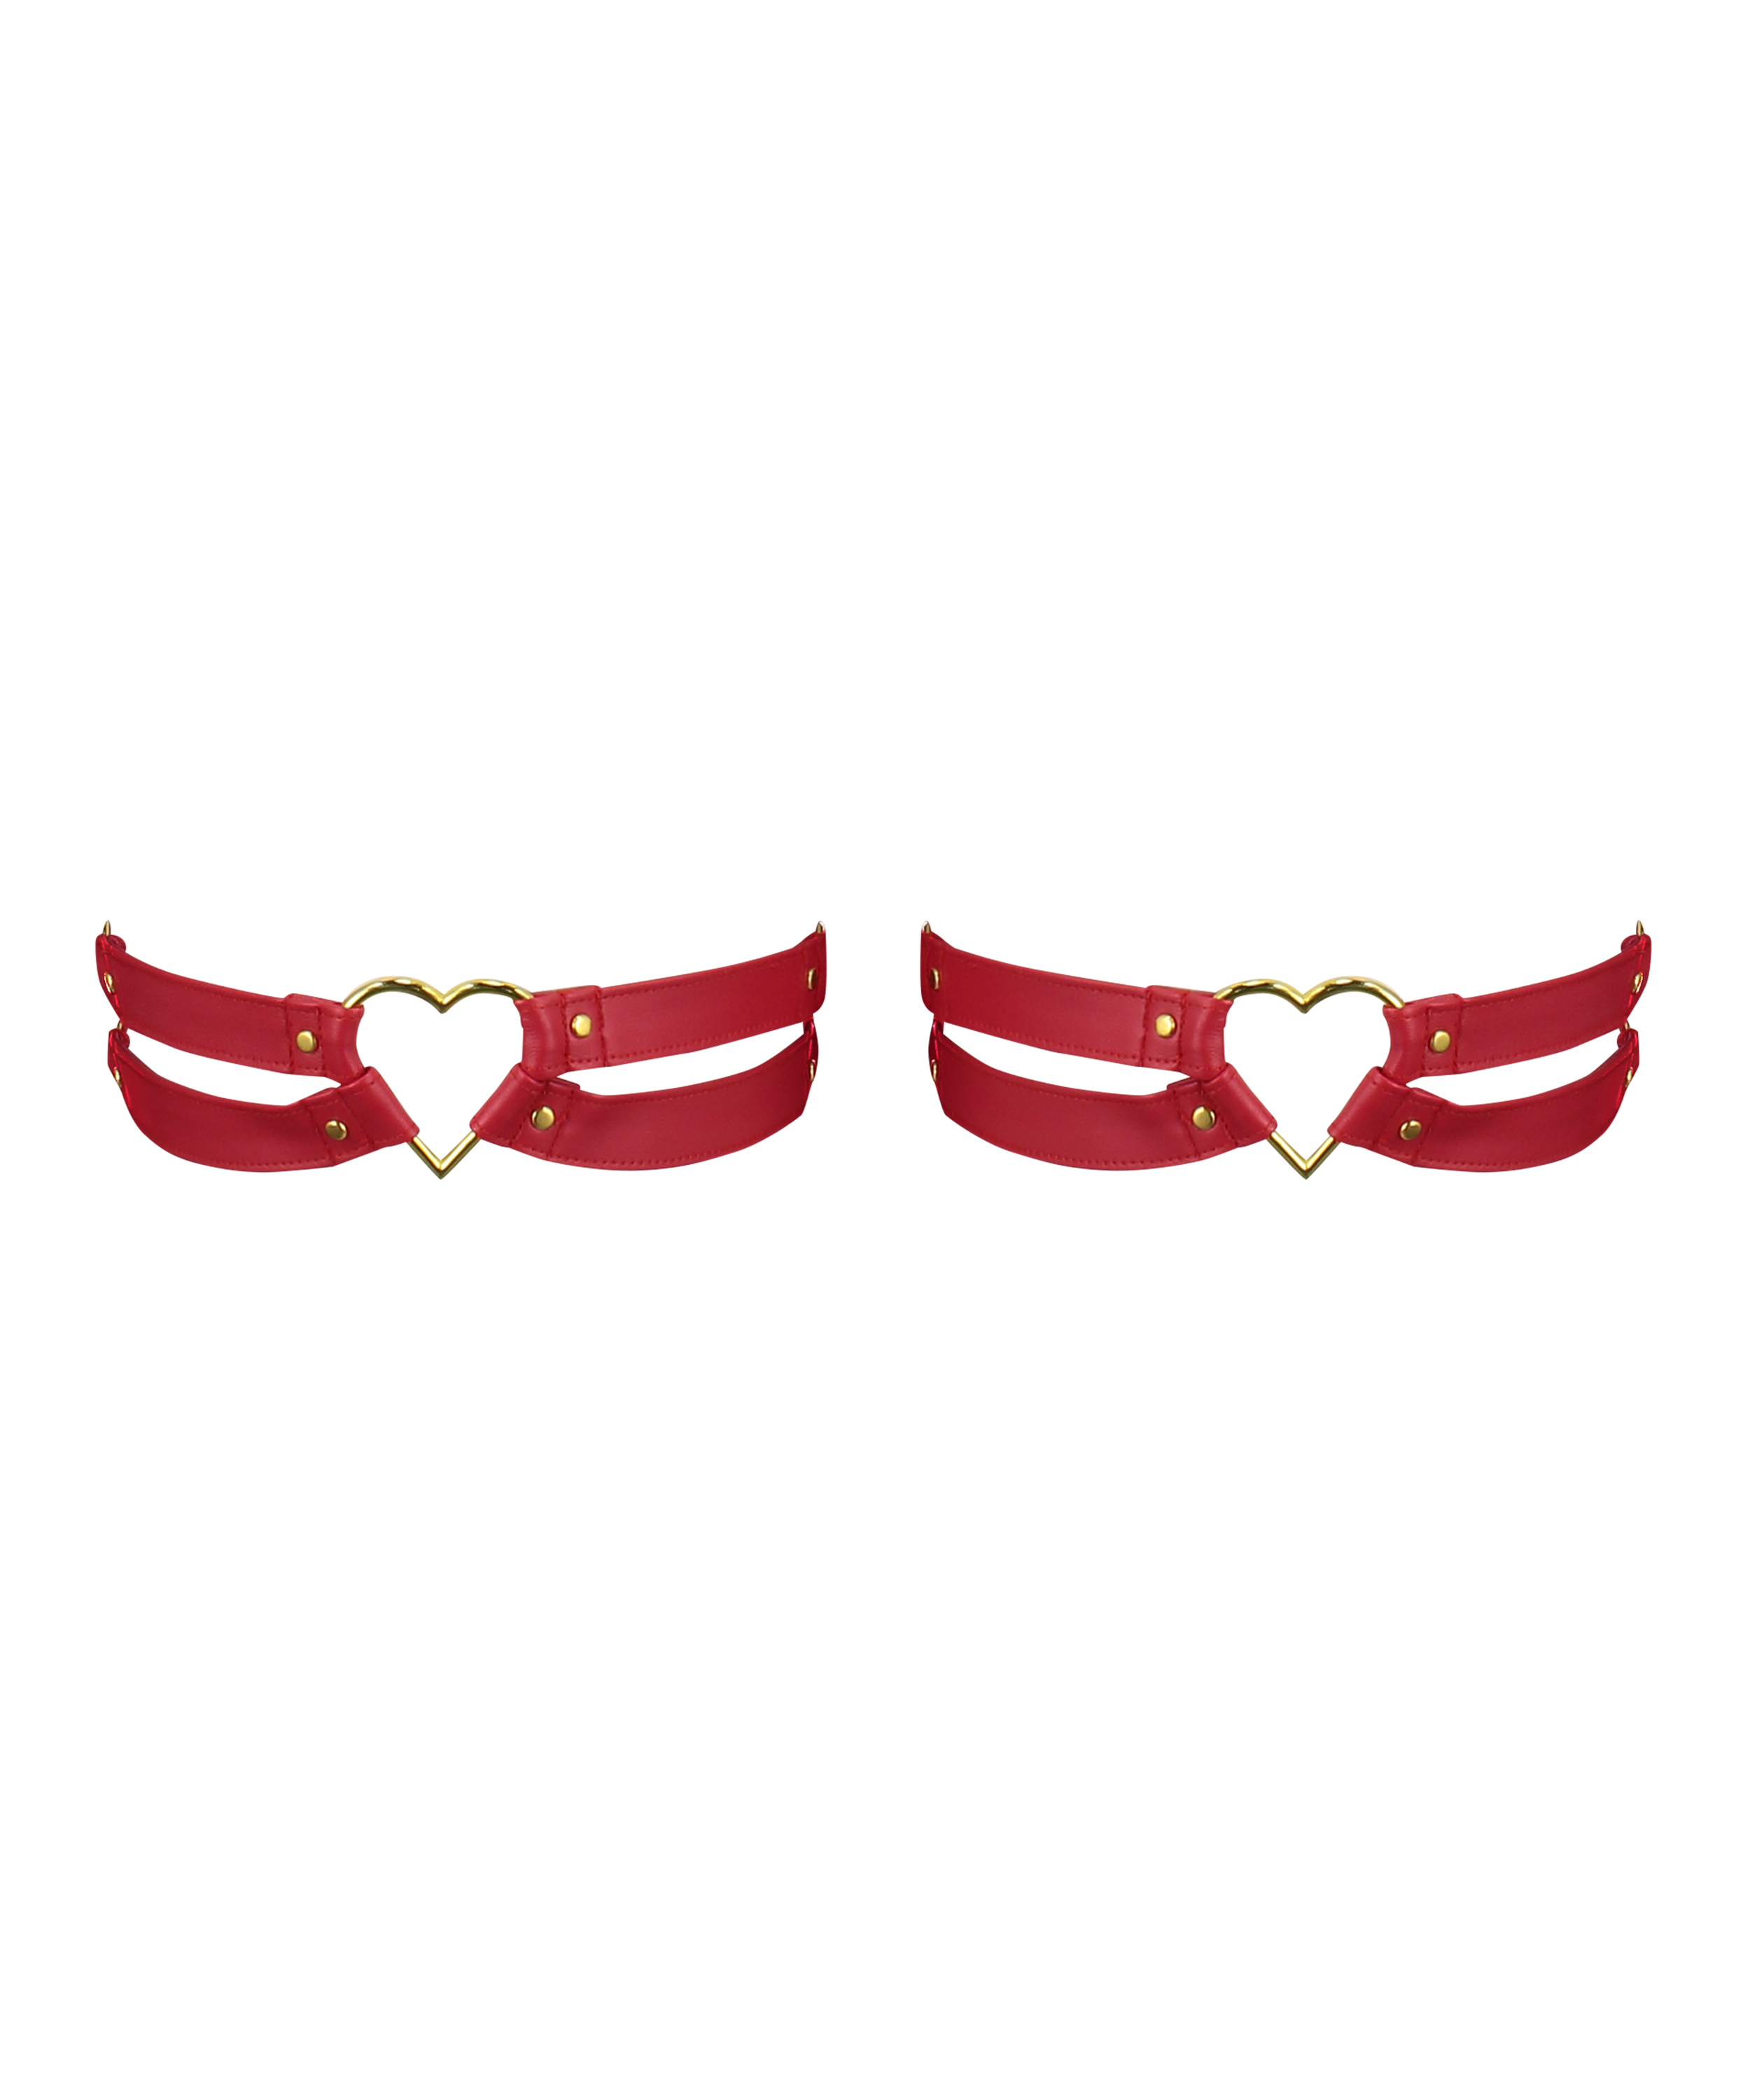 Private Heart Hold Up Suspenders, Red, main